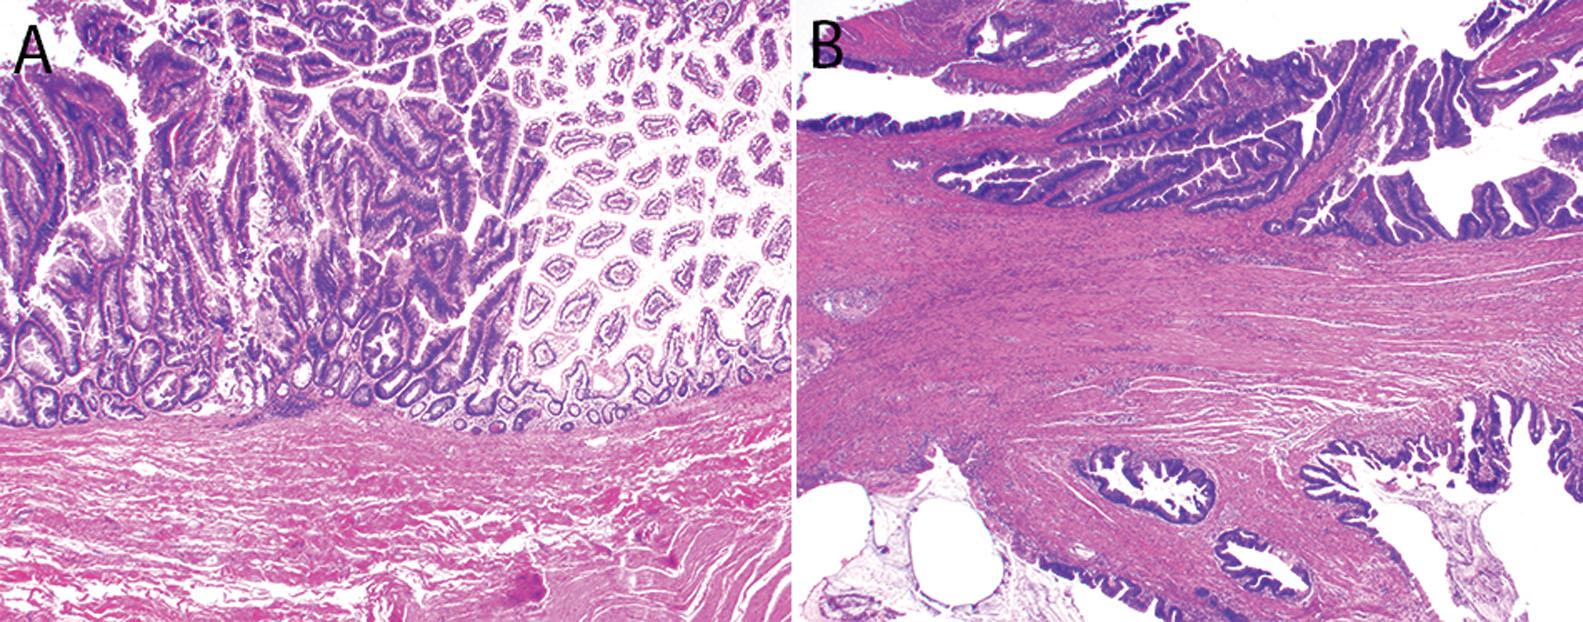 Figure 6.11, This patient had mucosal colonization of a segment of ileum that resembled a villous adenoma of the small intestine with a sharp transition from normal to overtly neoplastic epithelium ( A ). This patient had a known history of a primary appendiceal mucinous adenocarcinoma with evidence of disseminated peritoneal disease, numerous serosal tumor deposits, and one area of transmural invasion into the bowel wall ( B ), arguing against a primary small intestinal adenocarcinoma.